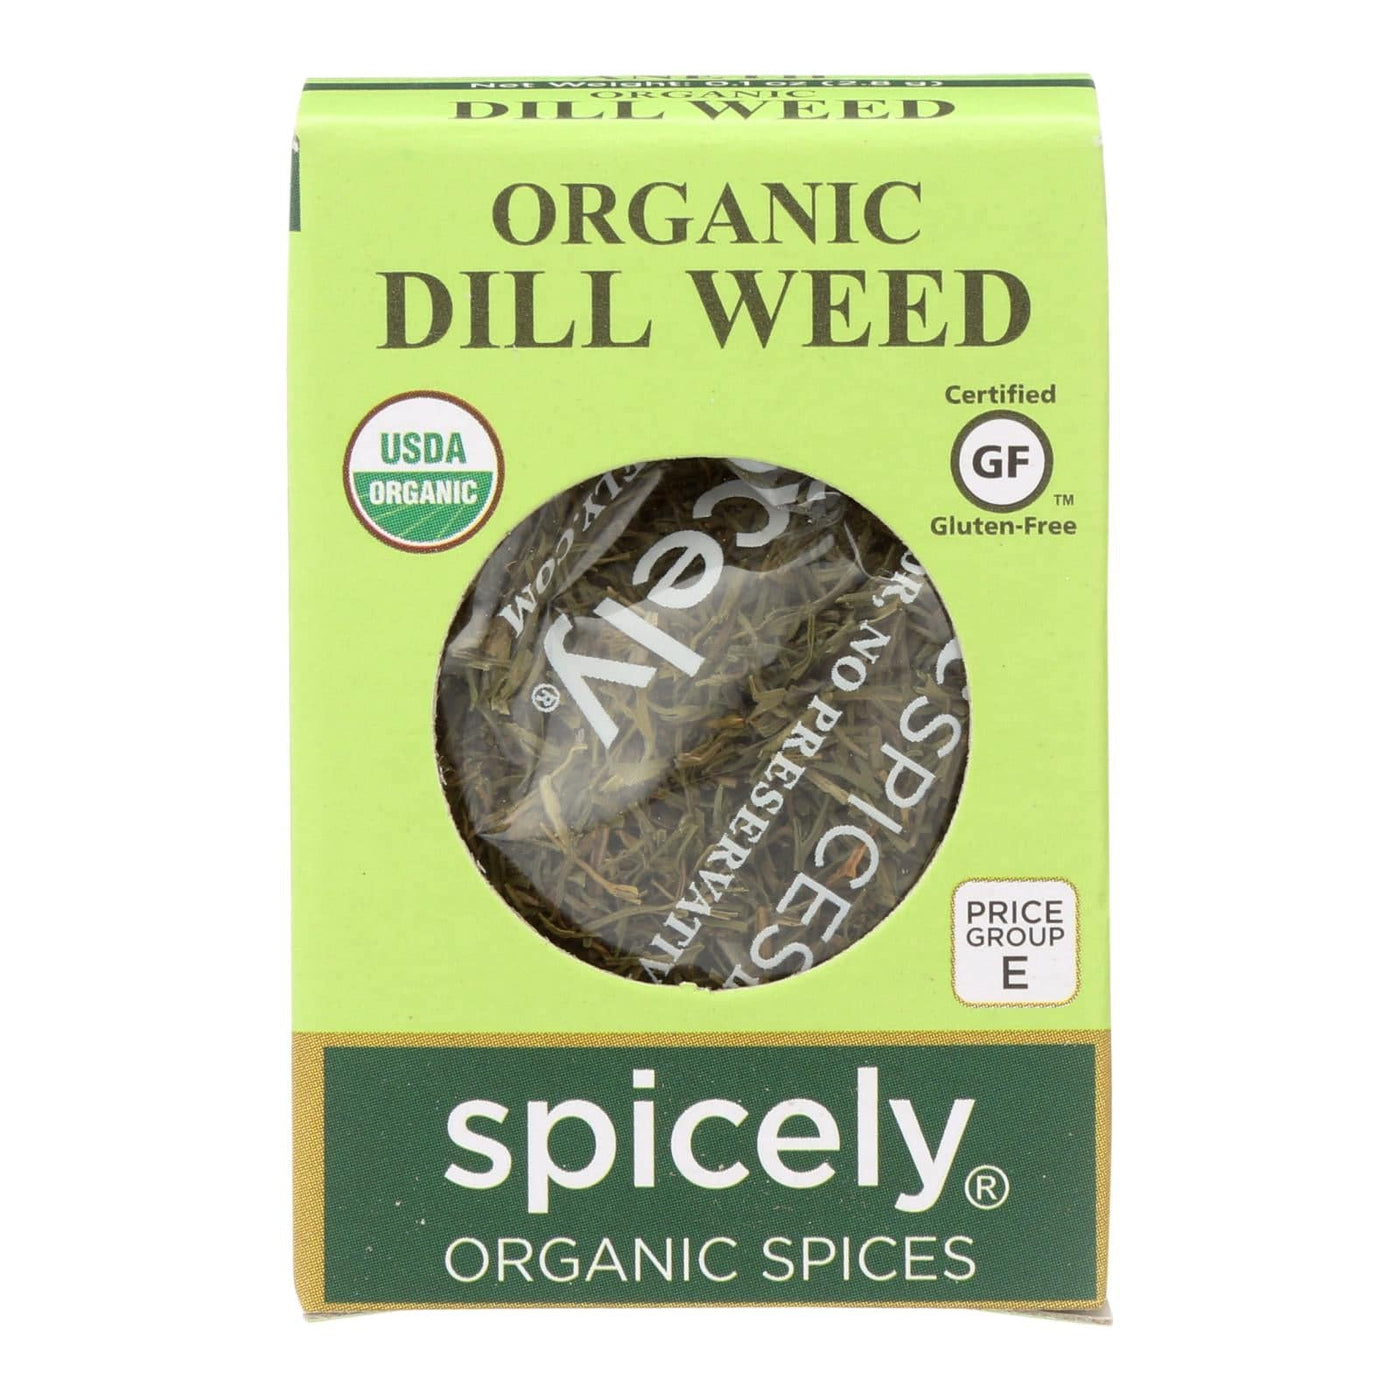 Buy Spicely Organics - Organic Dill Weed - Case Of 6 - 0.1 Oz.  at OnlyNaturals.us